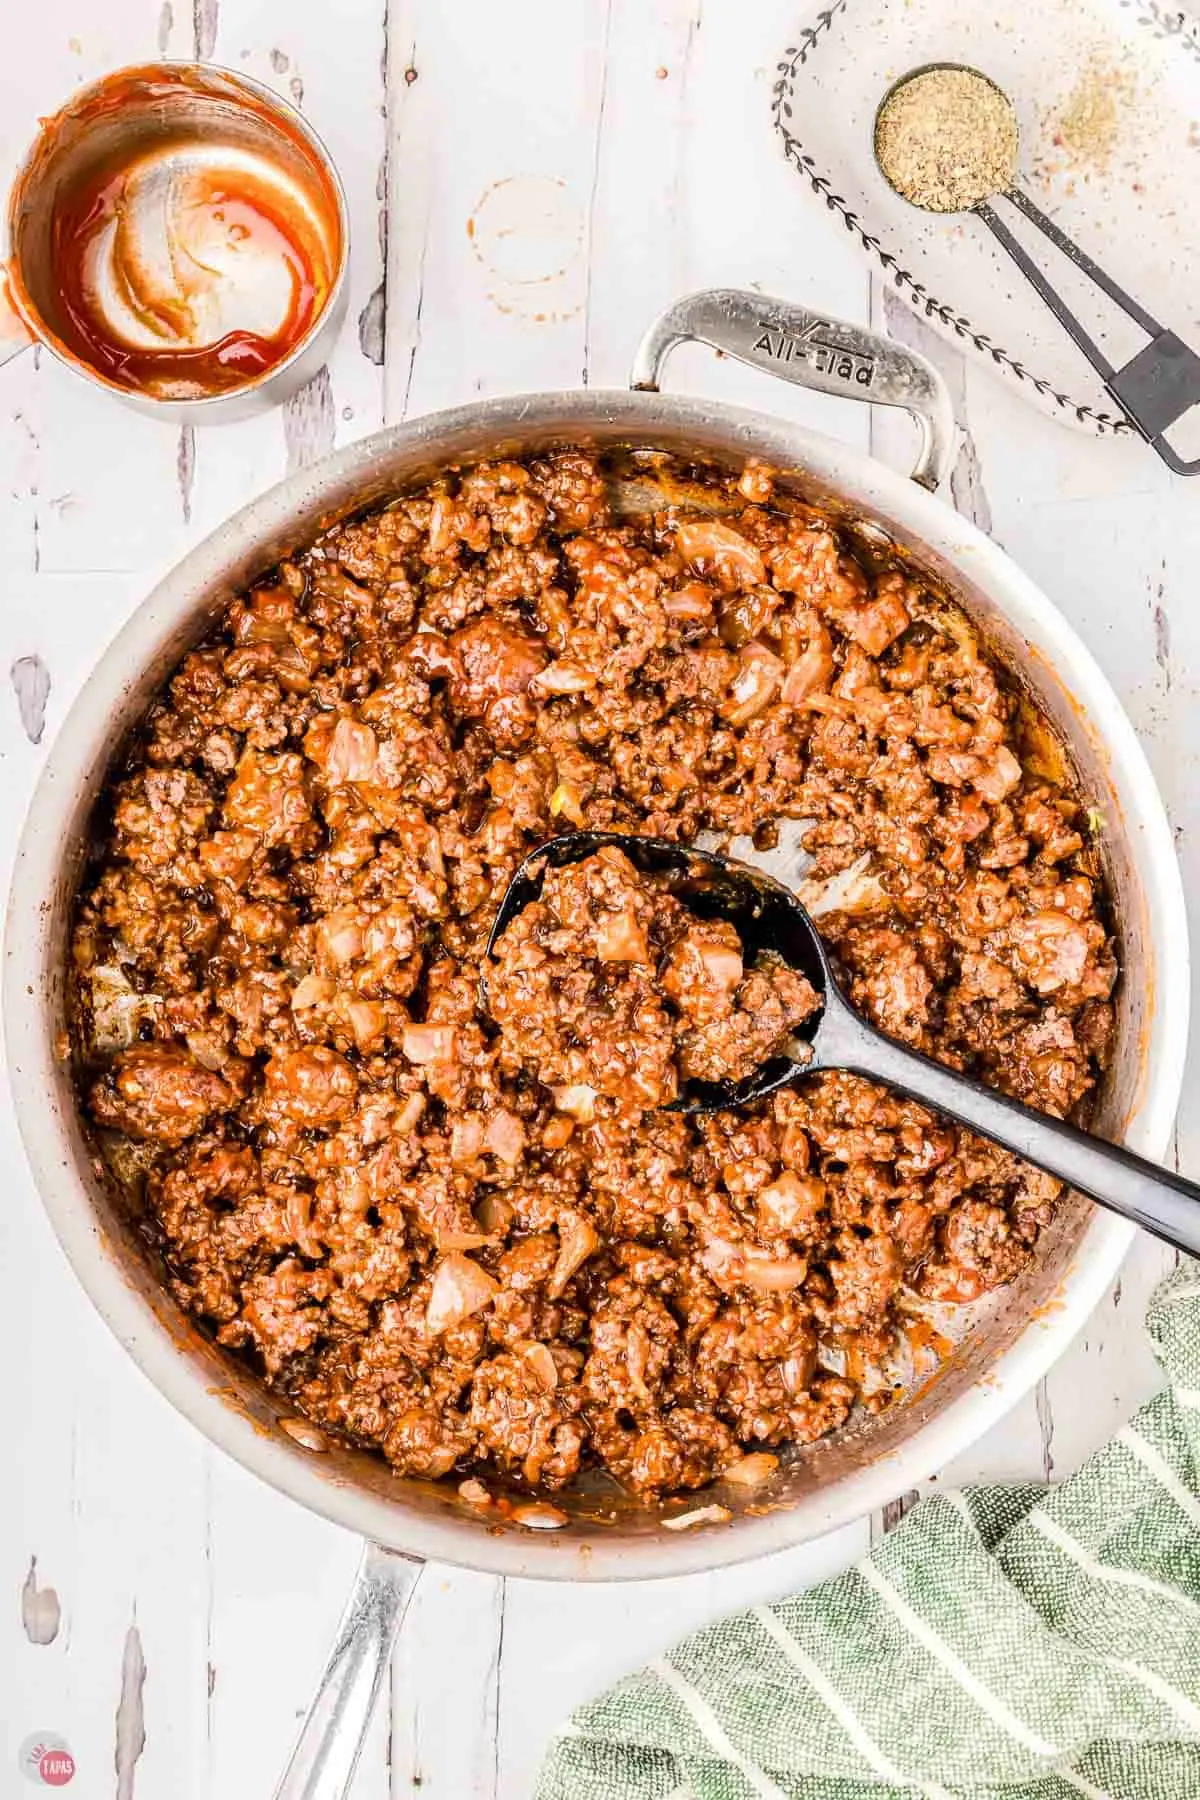 tangy flavor of sloppy joe mixture in a skillet